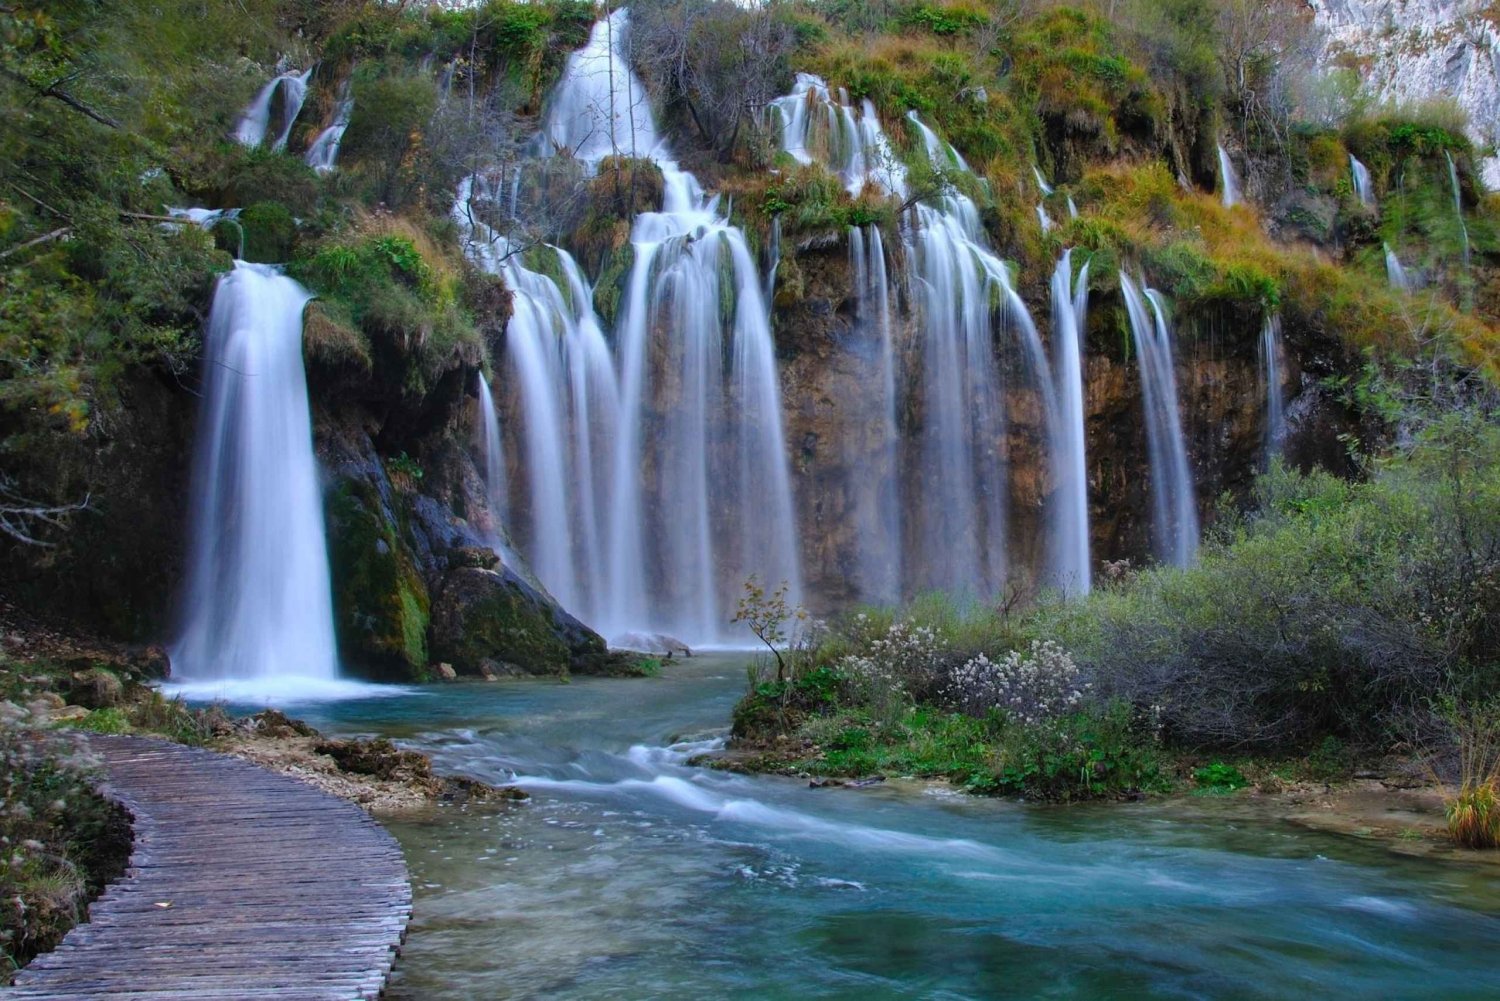 From Zadar: Round-Trip Transfer to Plitvice Lakes